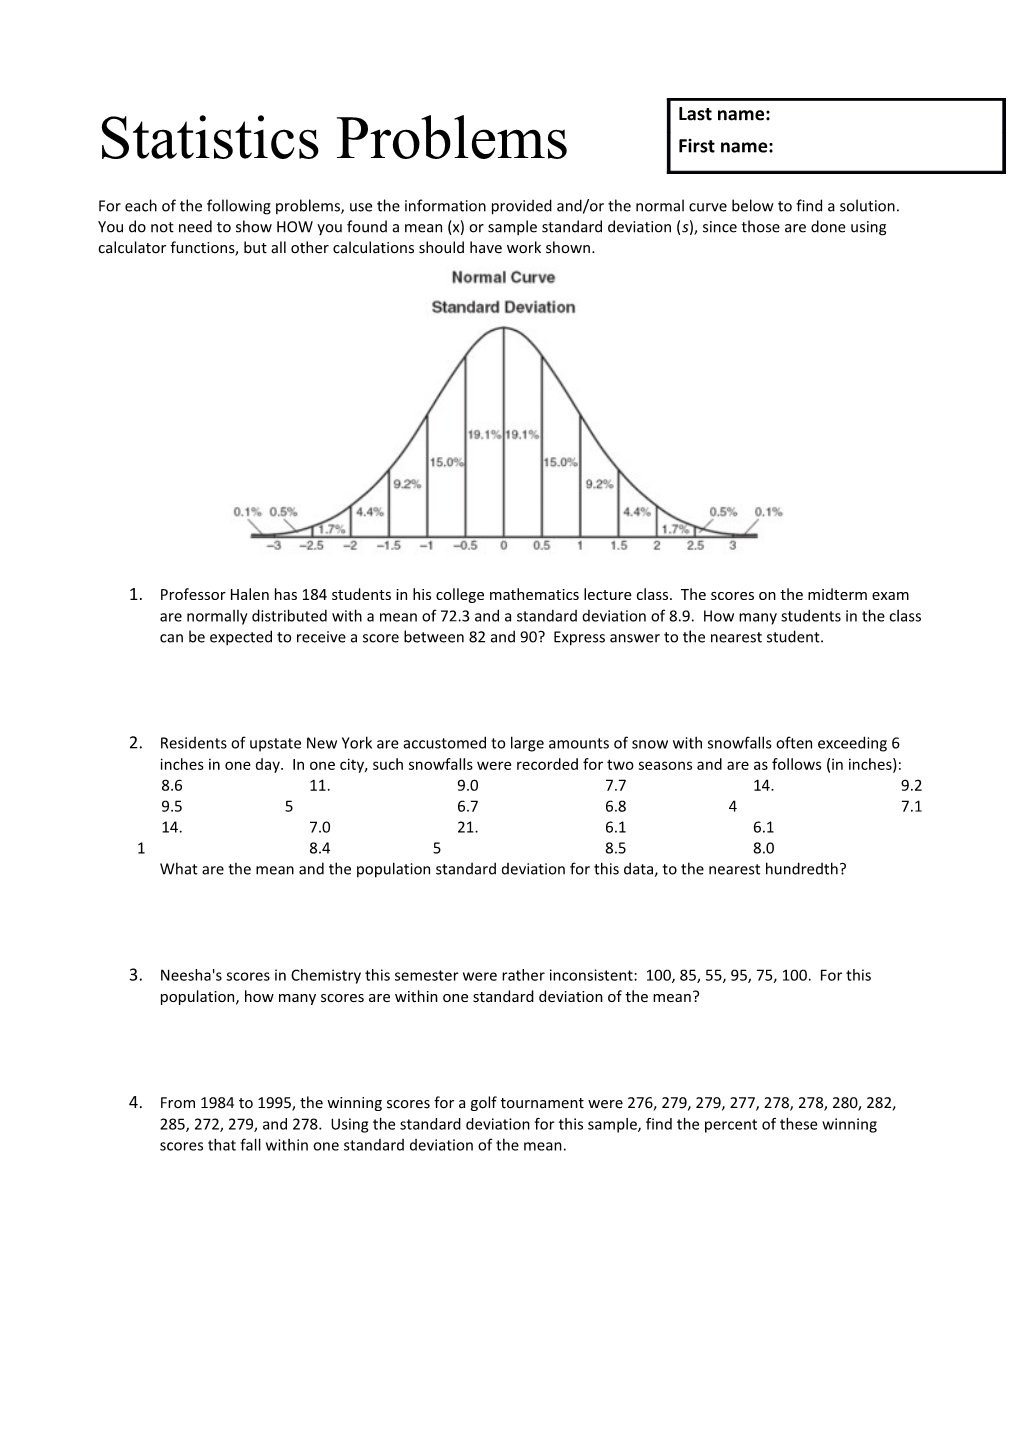 For Each of the Following Problems, Use the Information Provided And/Or the Normal Curve